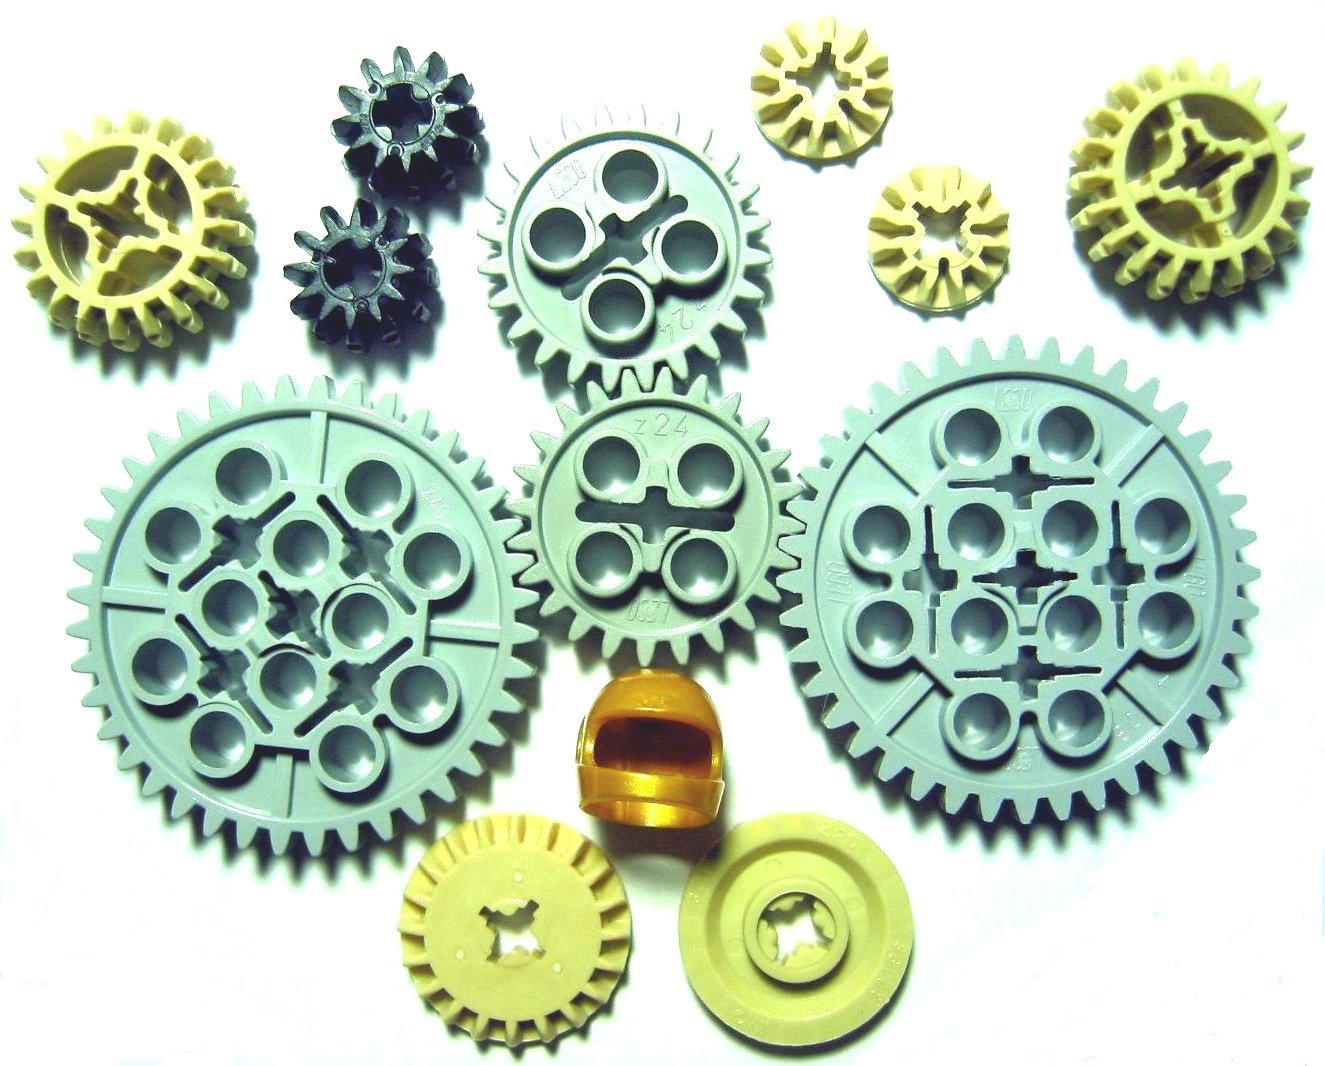 Lego Technic Gear Set Pieces Pieces In Old Light Grey With Additonal Golden